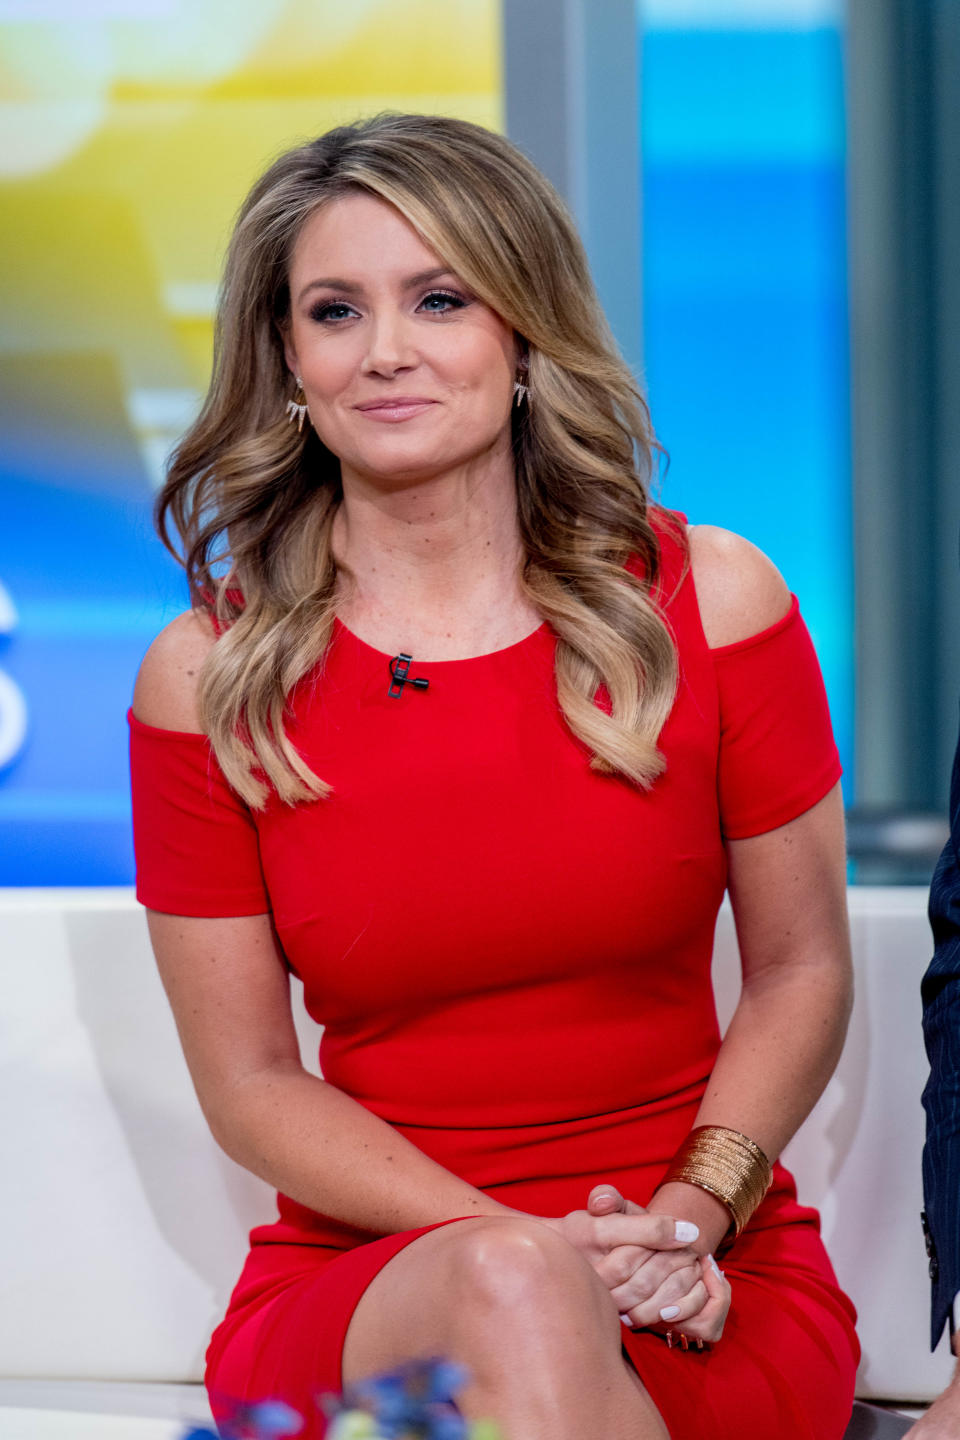 <i>Fox & Friends First co-anchor </i>Jillian Mele later called out Barbara L’Italien, a state senator from Massachusetts, on social media. (Photo: Roy Rochlin/Getty Images)